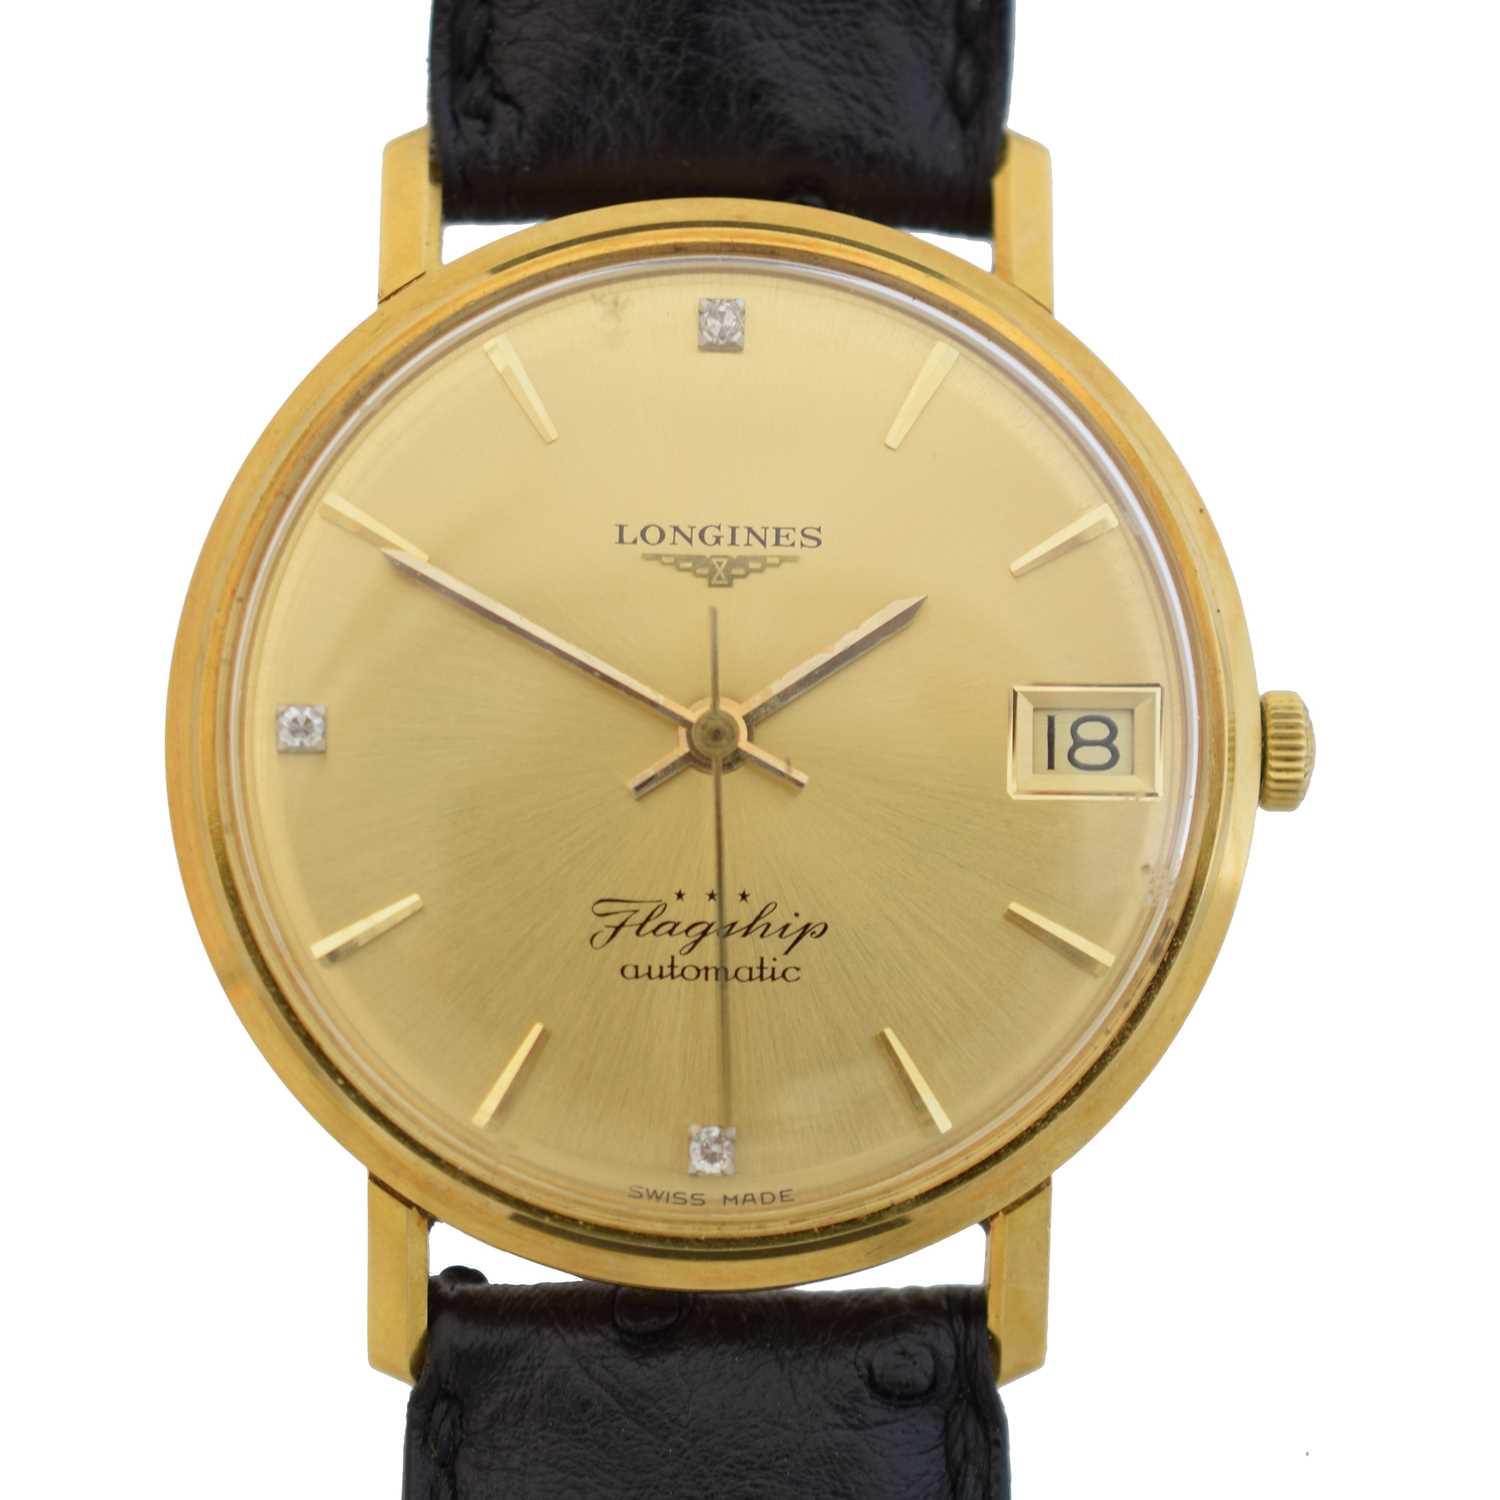 Lot 119 - A 1960s 18ct gold Longines Flagship automatic wristwatch